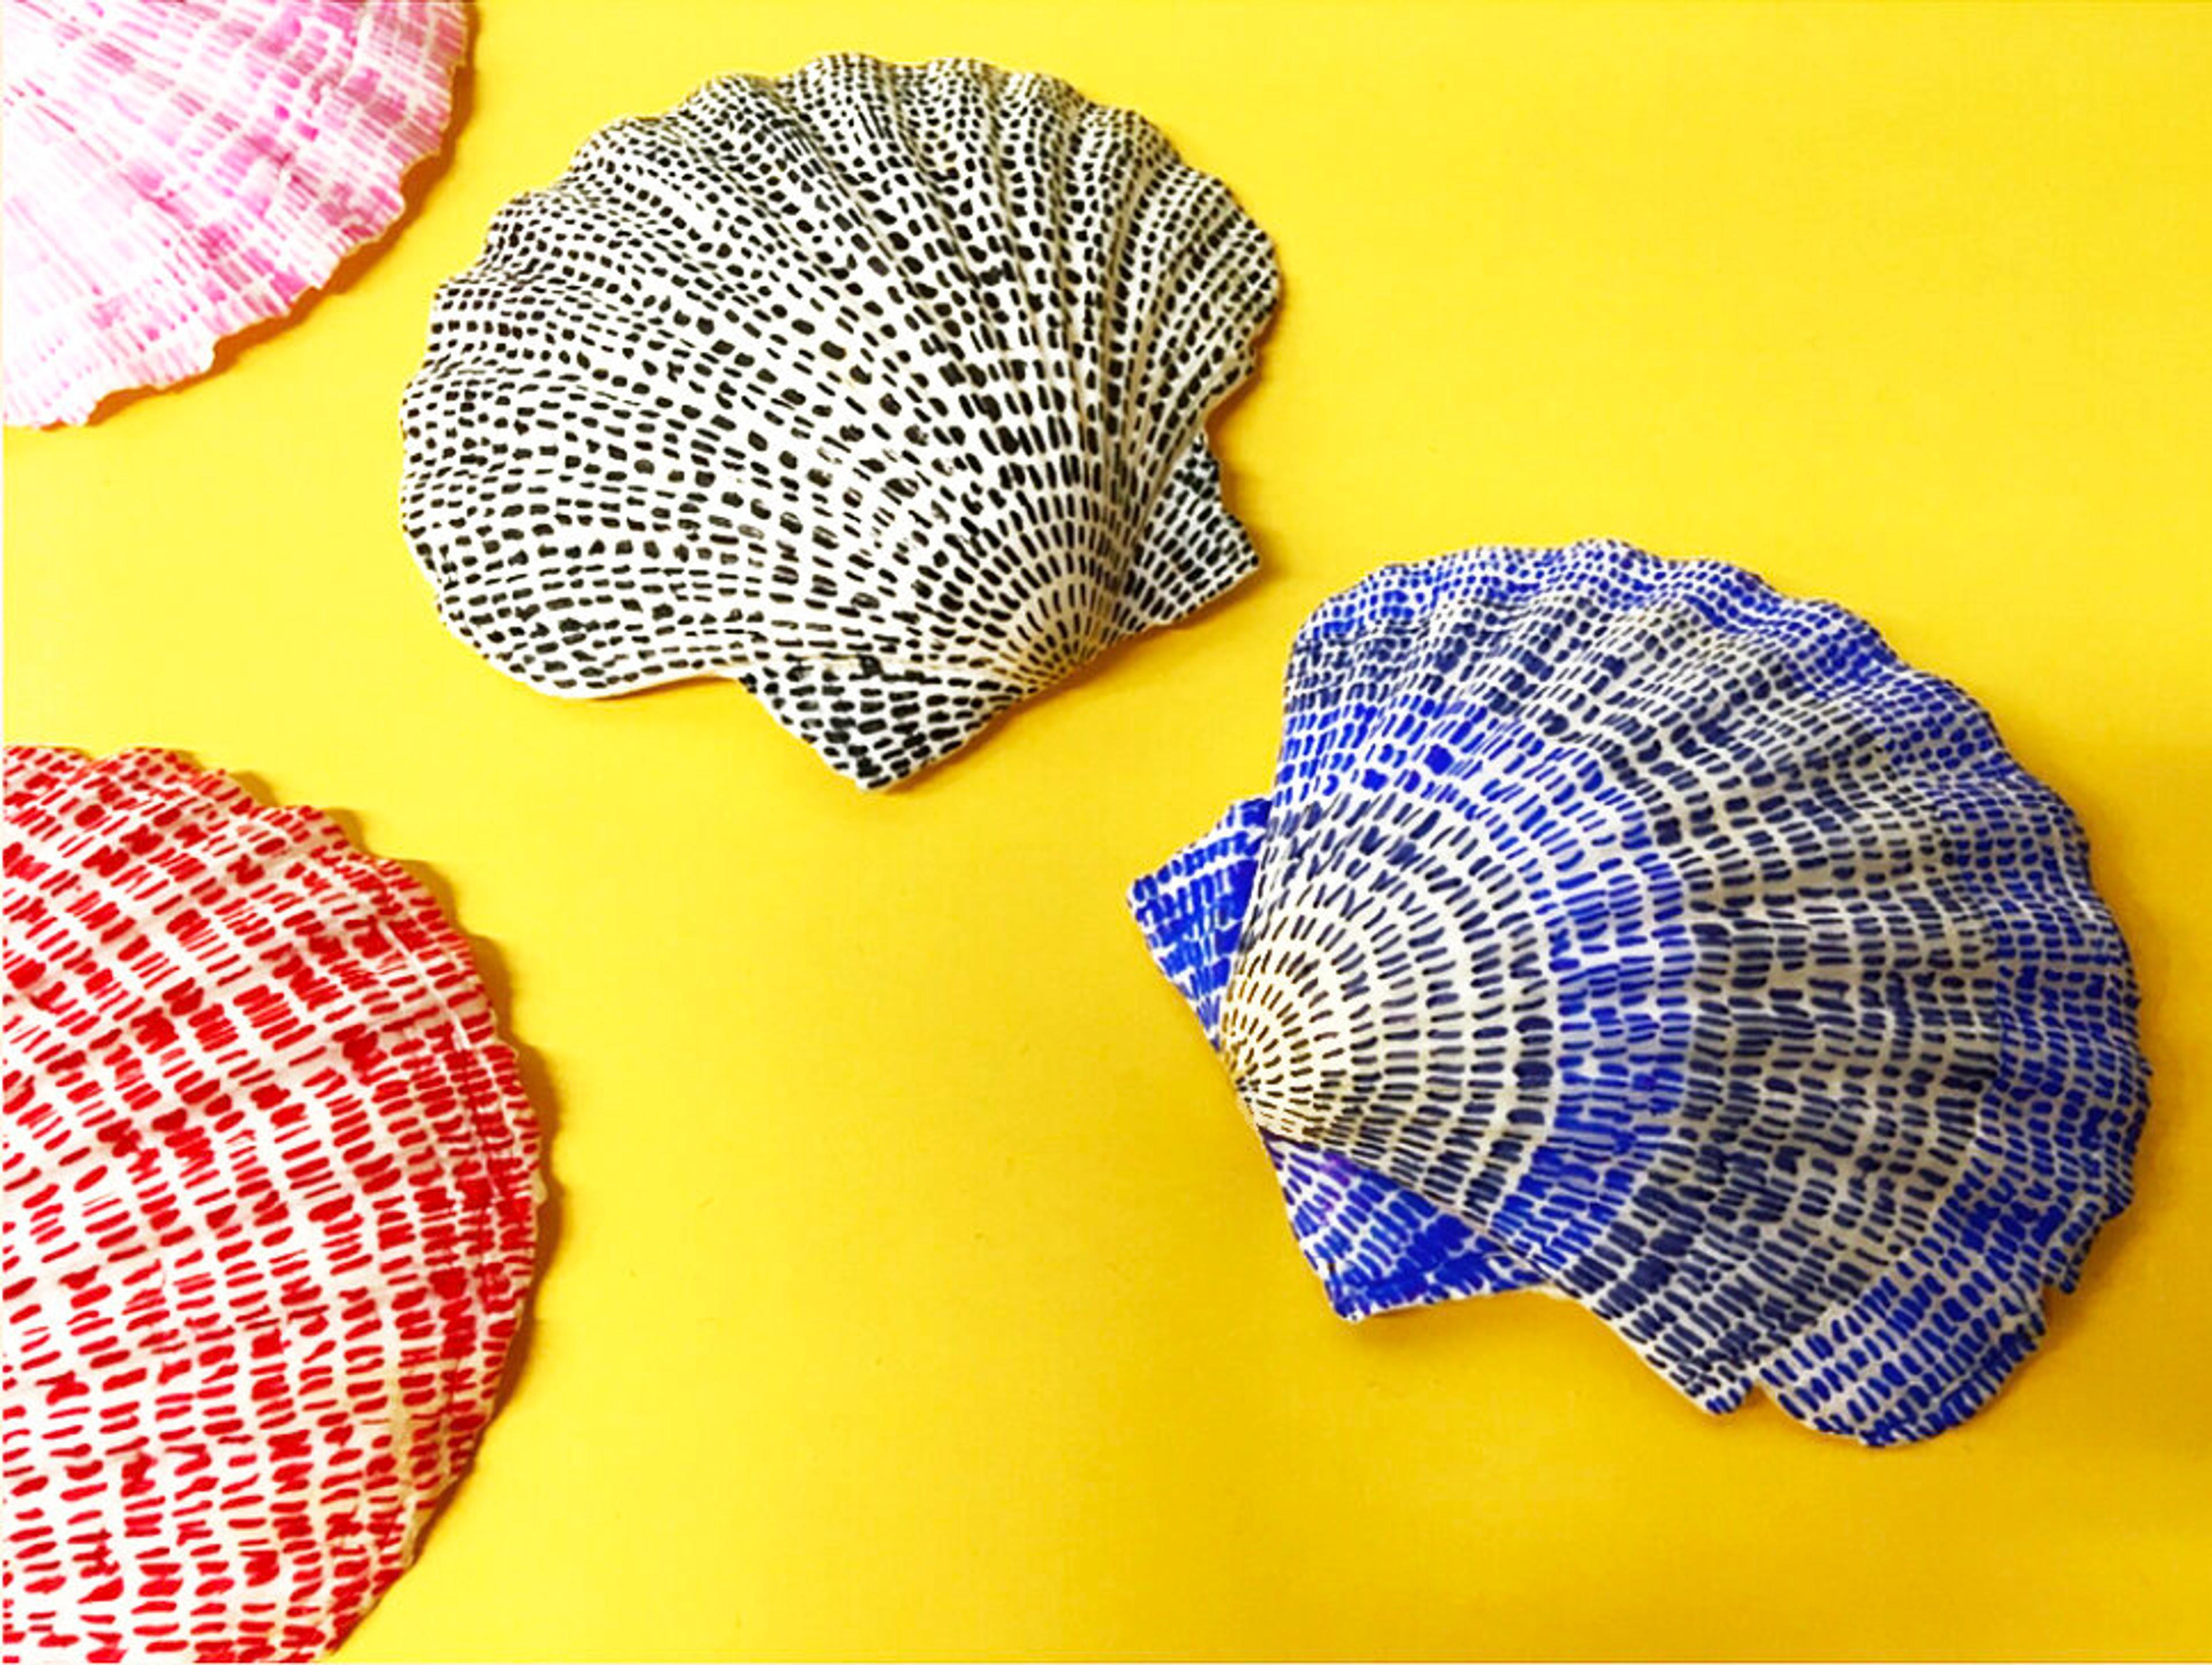 Four sea shells on a yellow background, each illustrated with a series of small line marks.